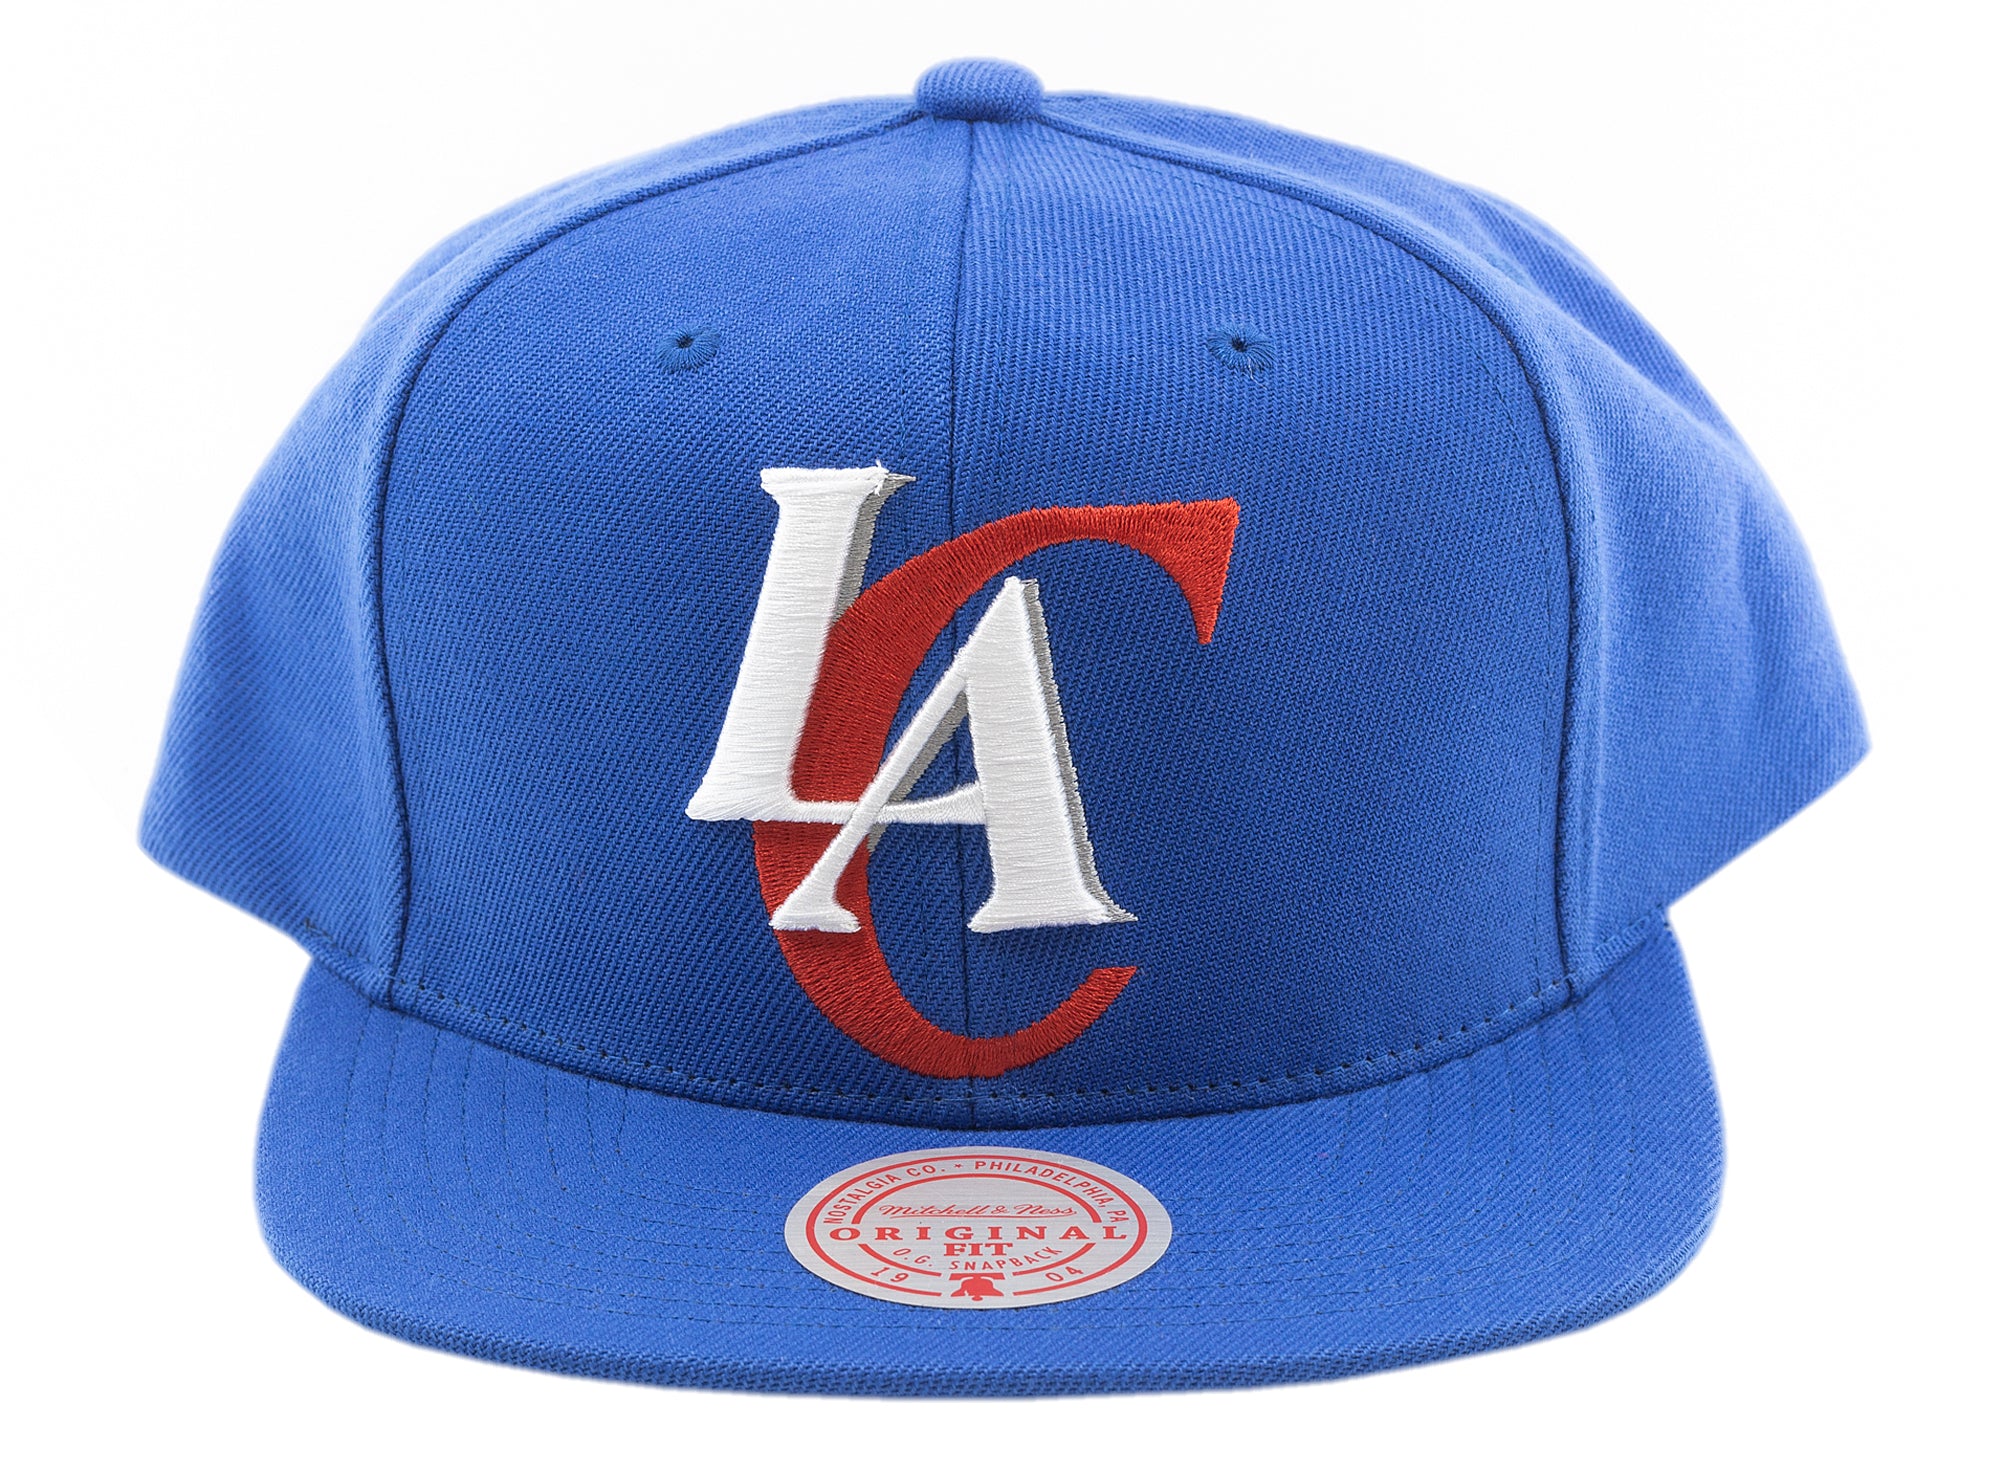 Los Angeles Clippers Mitchell & Ness Blue Linen Snapback Blue